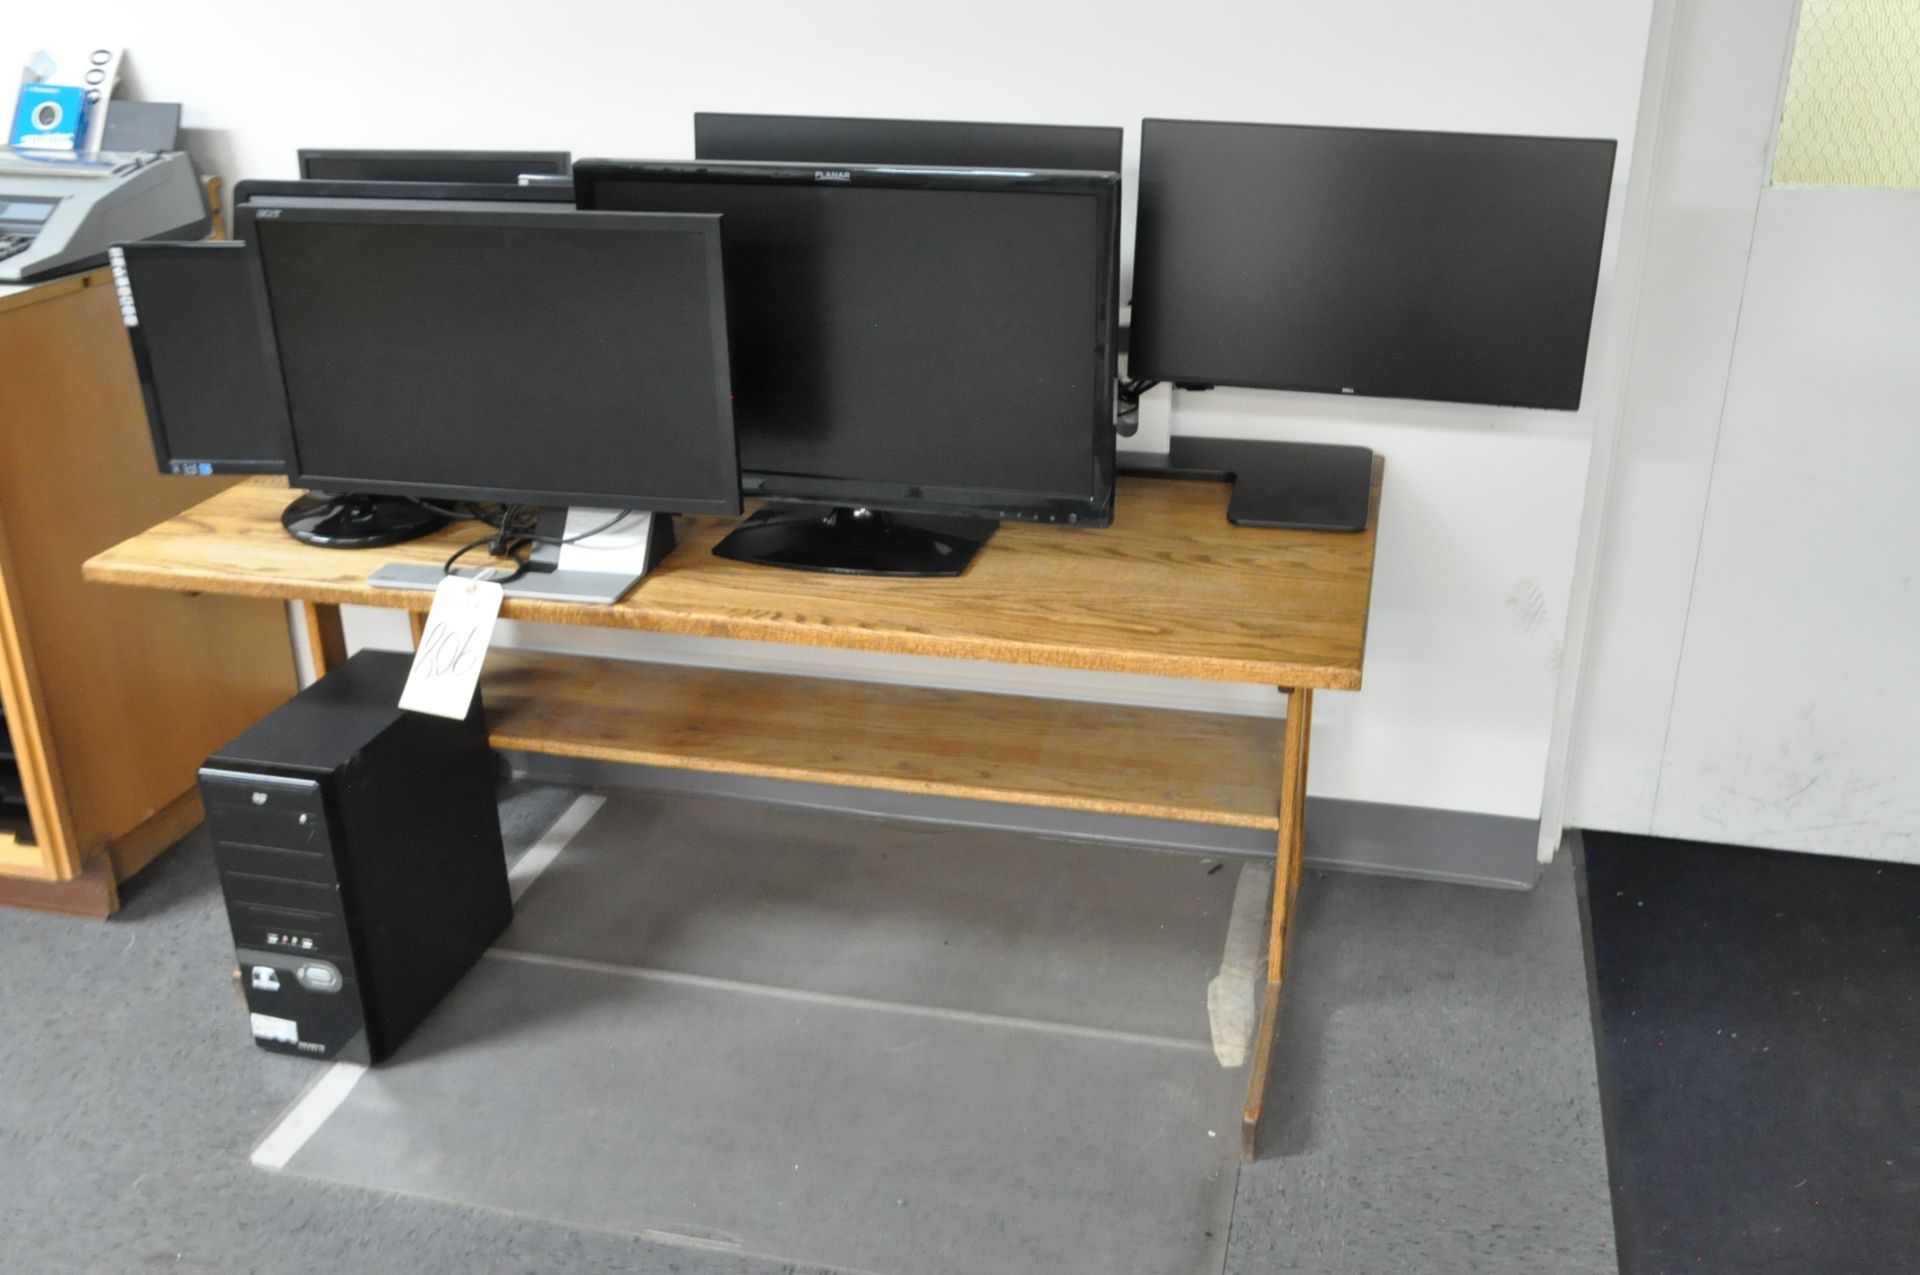 Lot-Various Computers and Monitors On/Under (1) Table, (Table Not Included)